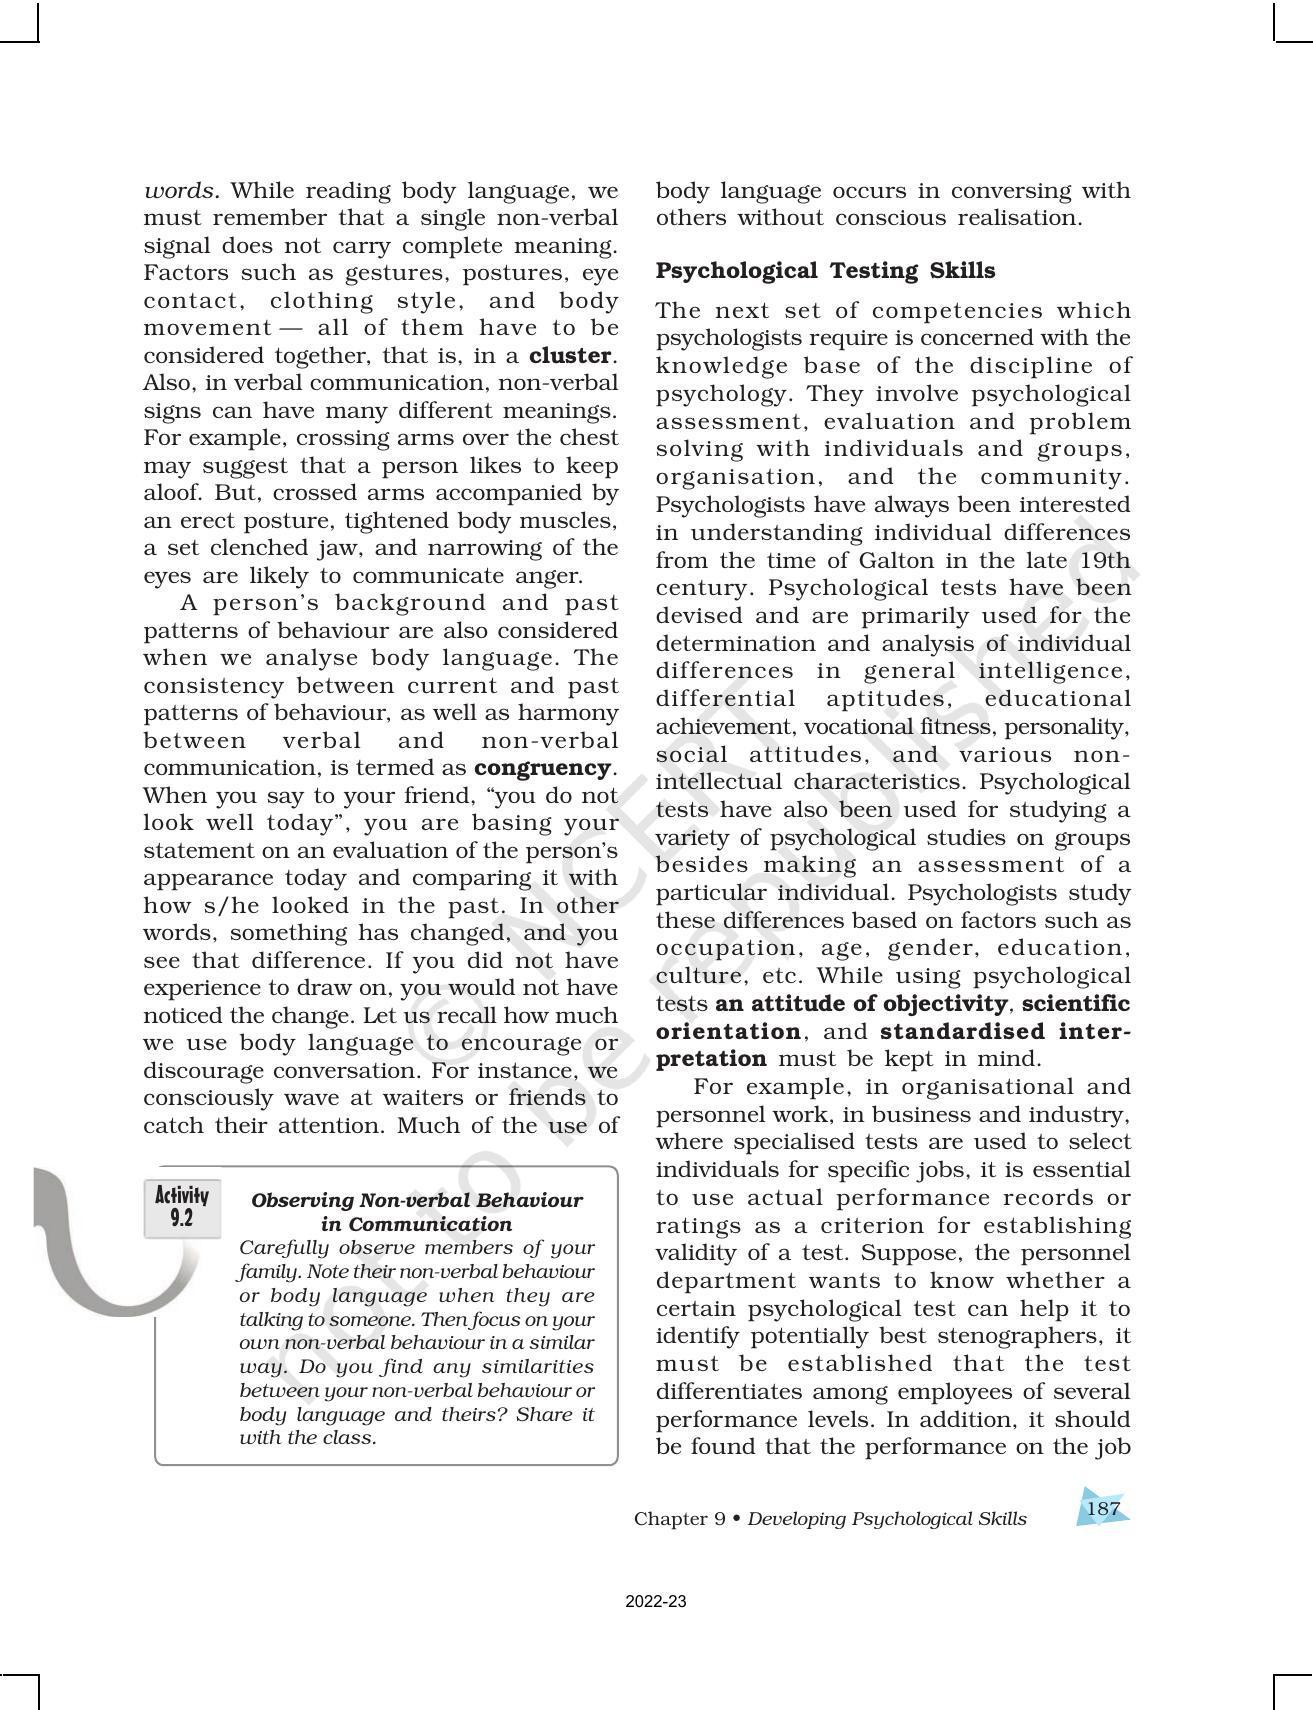 NCERT Book for Class 12 Psychology Chapter 9 Developing Psychological Skills - Page 11